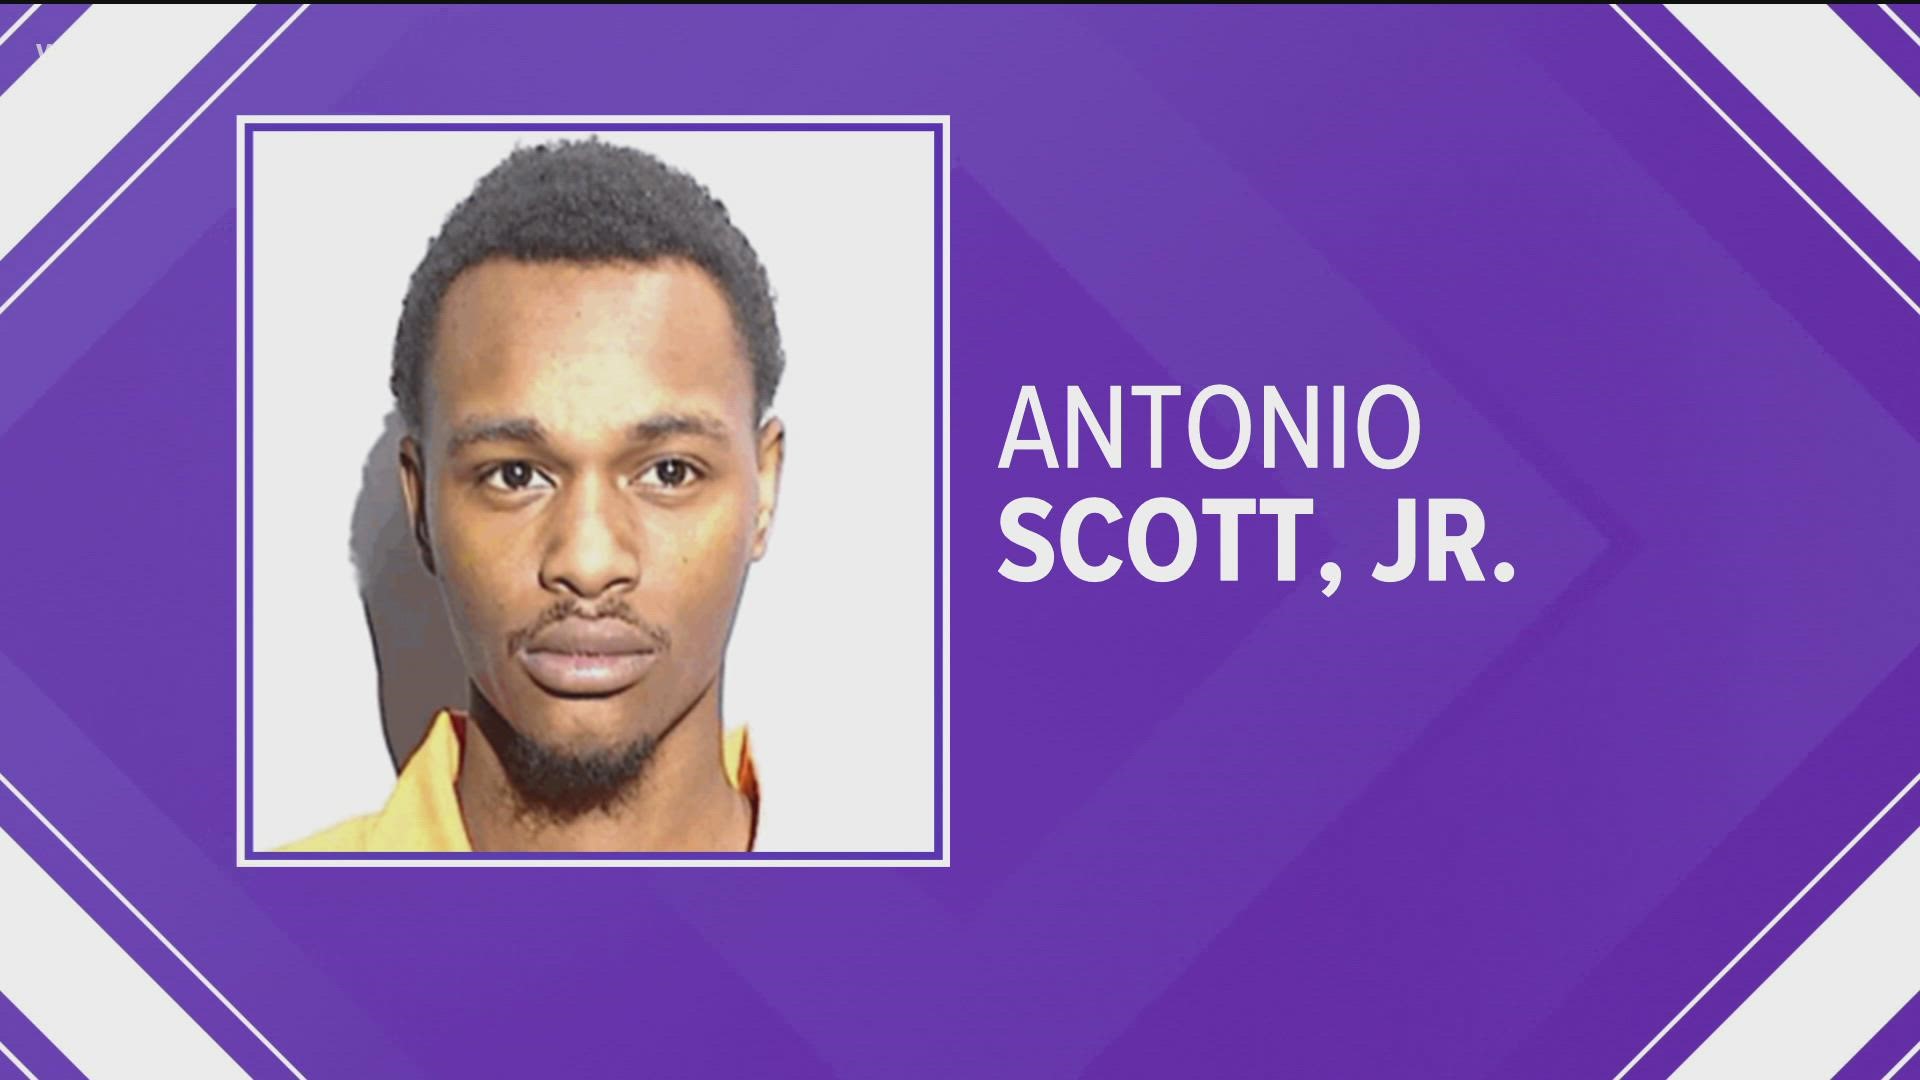 Toledo police say DNA evidence led them to Antonio Scott, Jr., who is now charged with the murder of JoJo Striker.